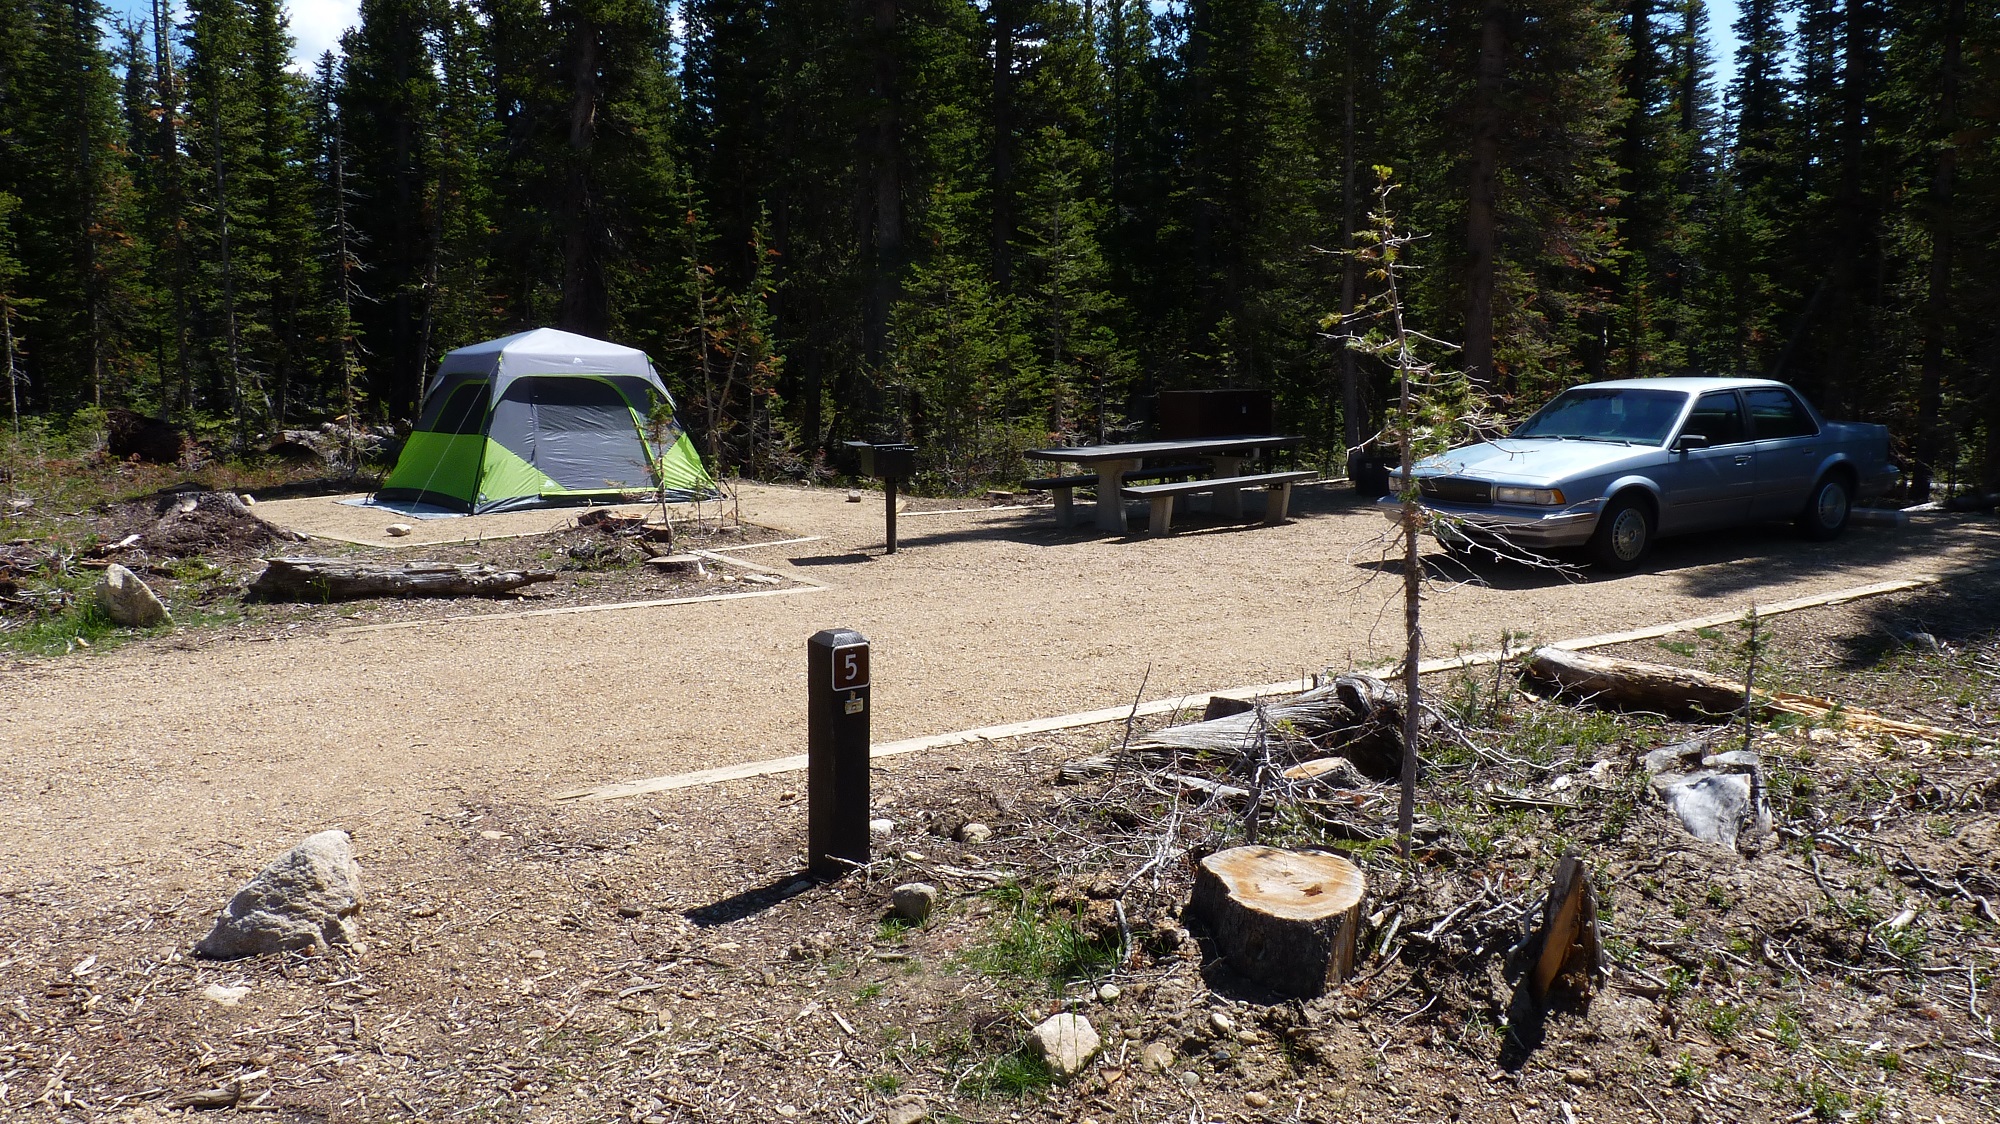 Some campsites are shady, some have full sun